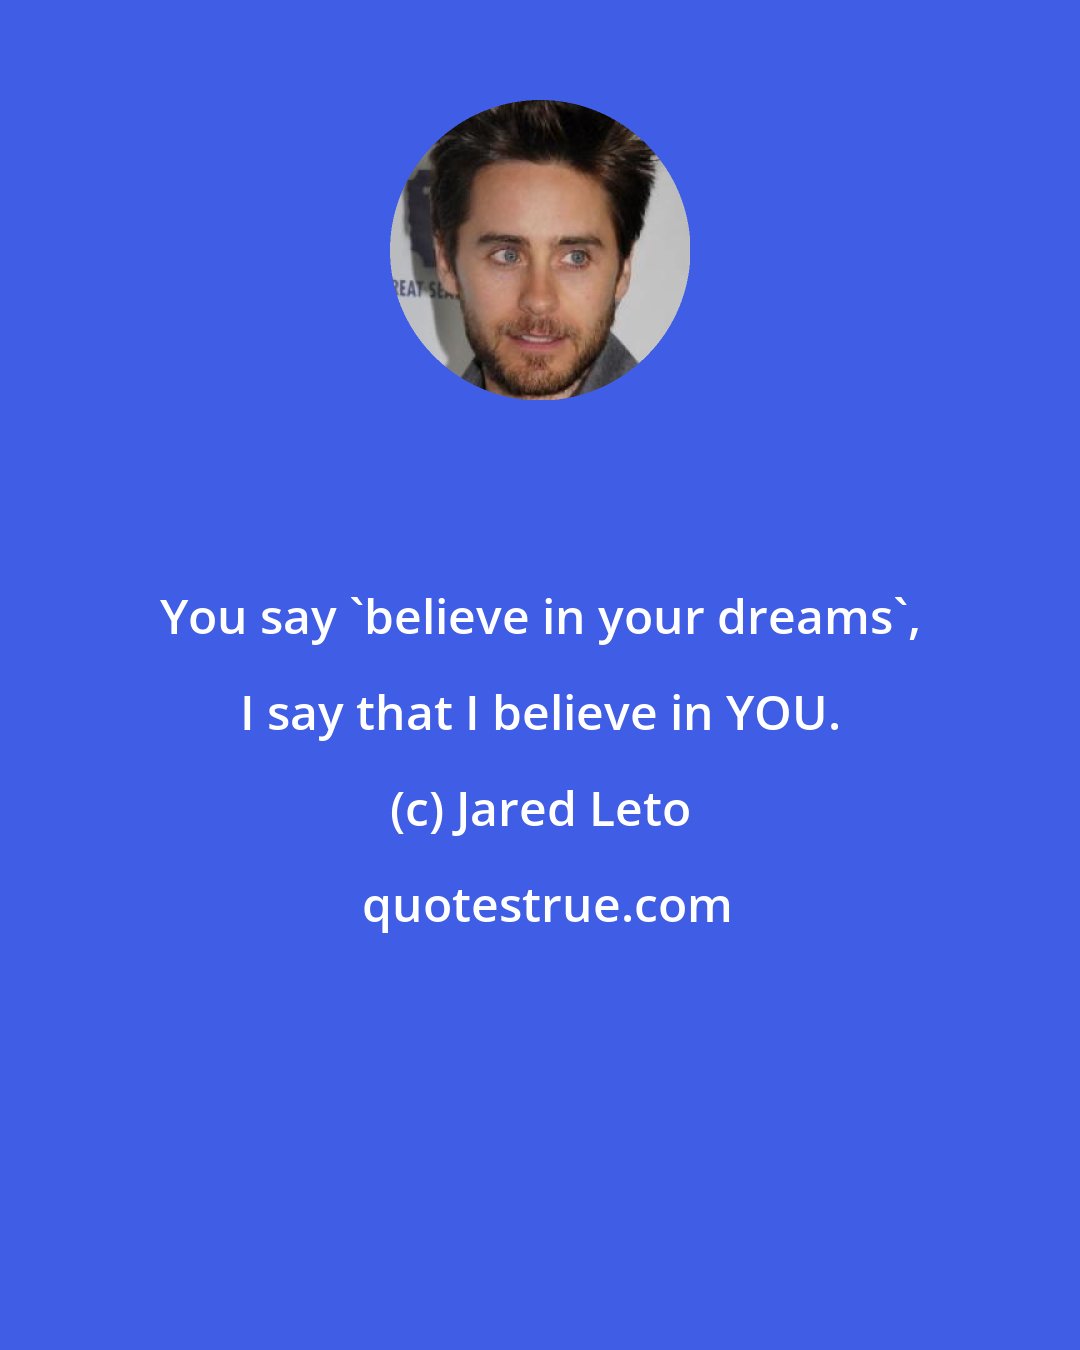 Jared Leto: You say 'believe in your dreams', I say that I believe in YOU.